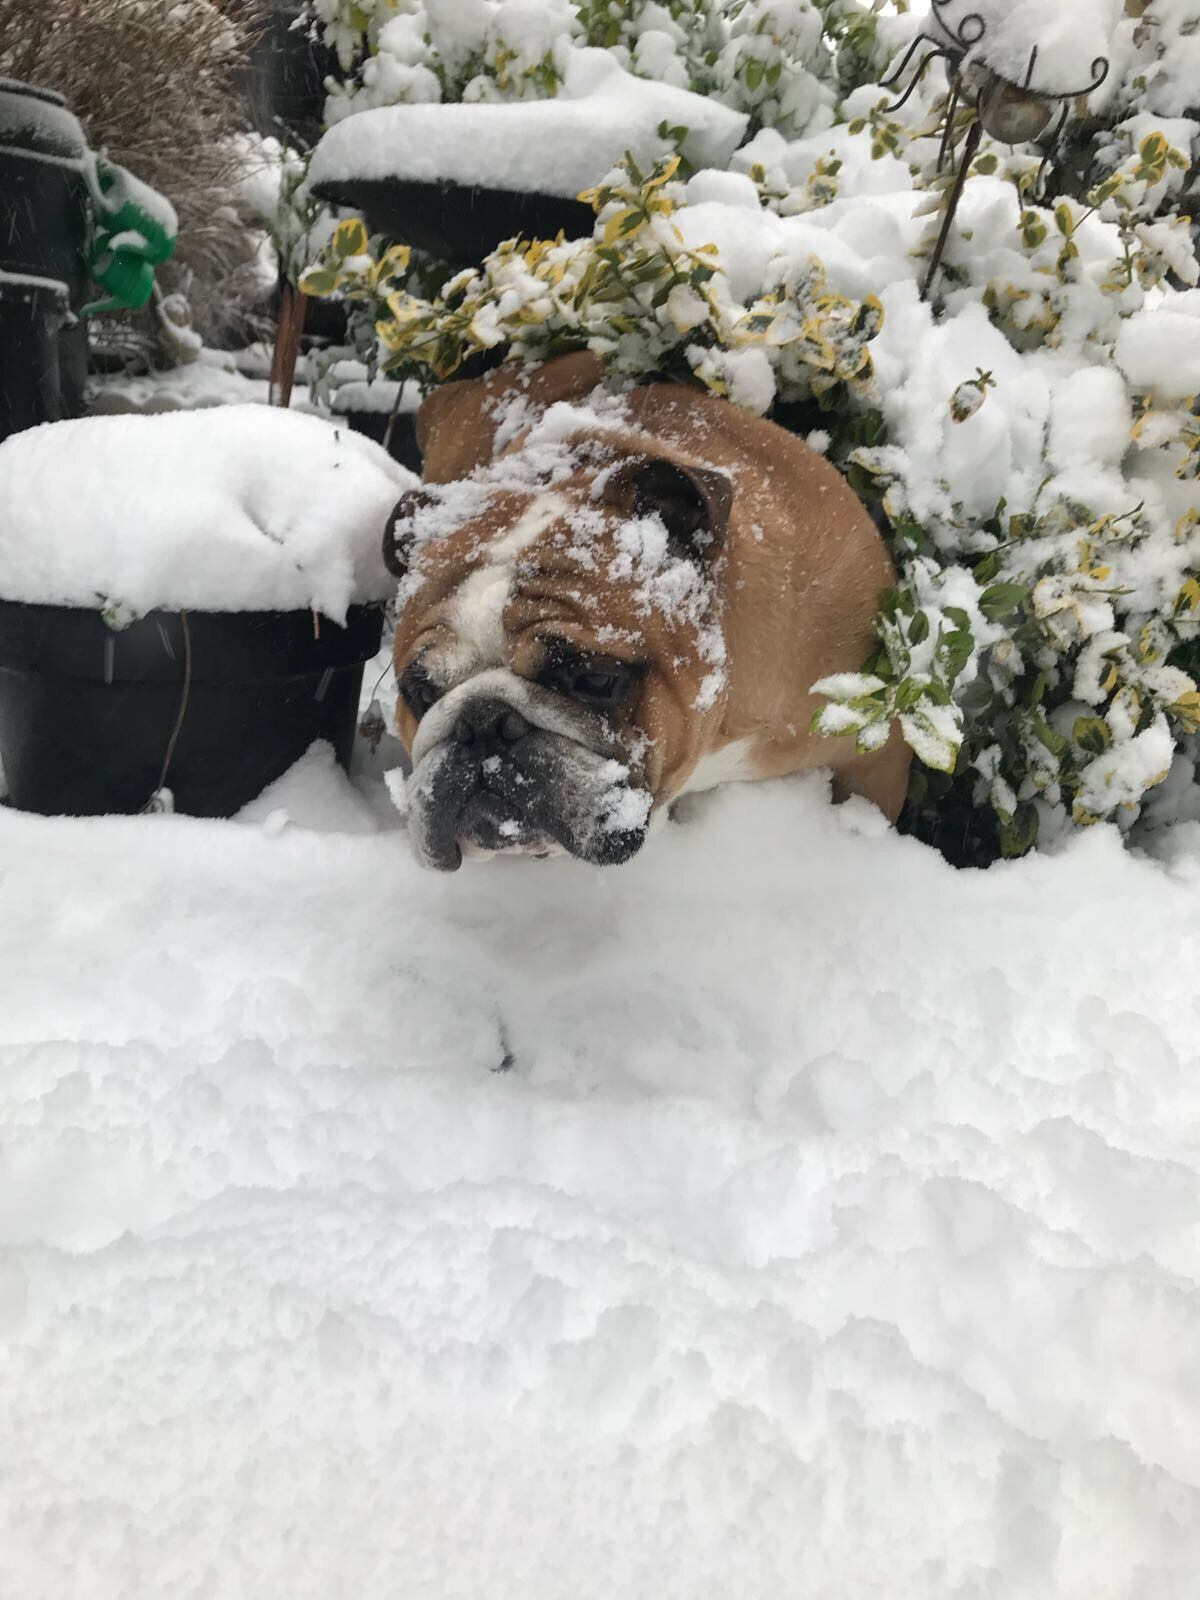 Bruce the dog having fun in the snow. Picture by Vickie Forrest